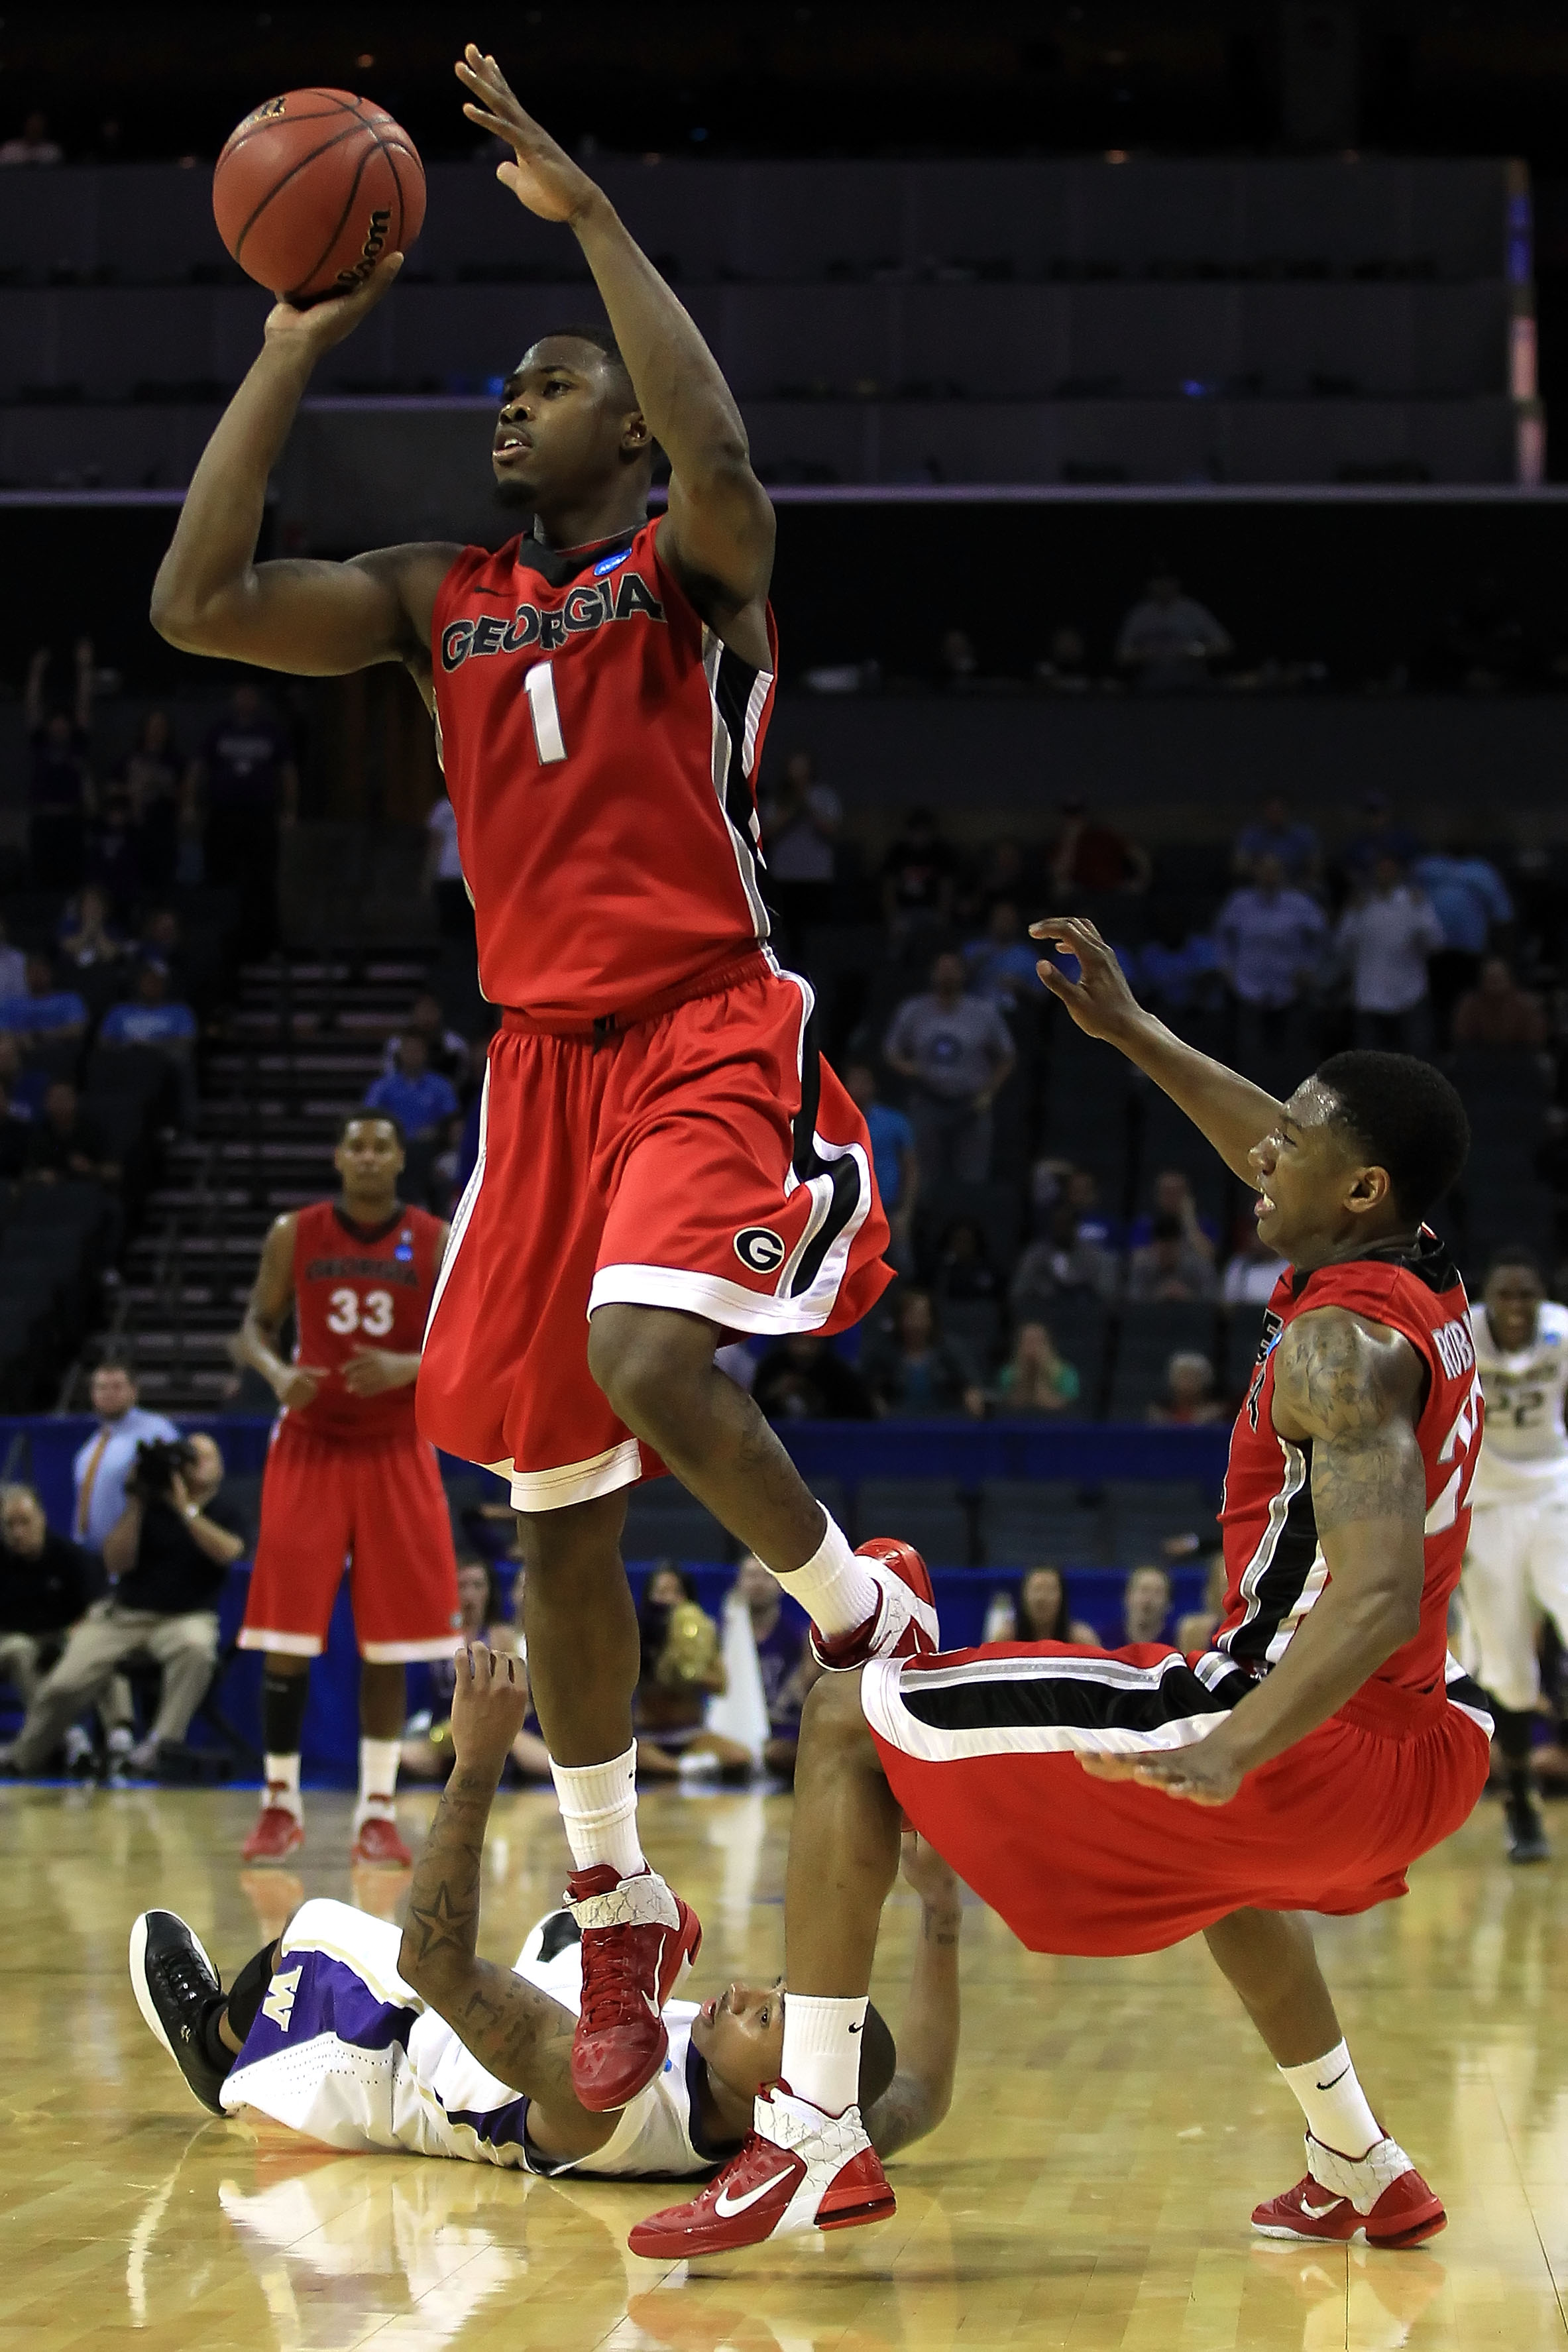 CHARLOTTE, NC - MARCH 18:  Travis Leslie #1 of the Georgia Bulldogs misses a last second three-pointer that would have tied the game against the Washington Huskies during the second round of the 2011 NCAA men's basketball tournament at Time Warner Cable A